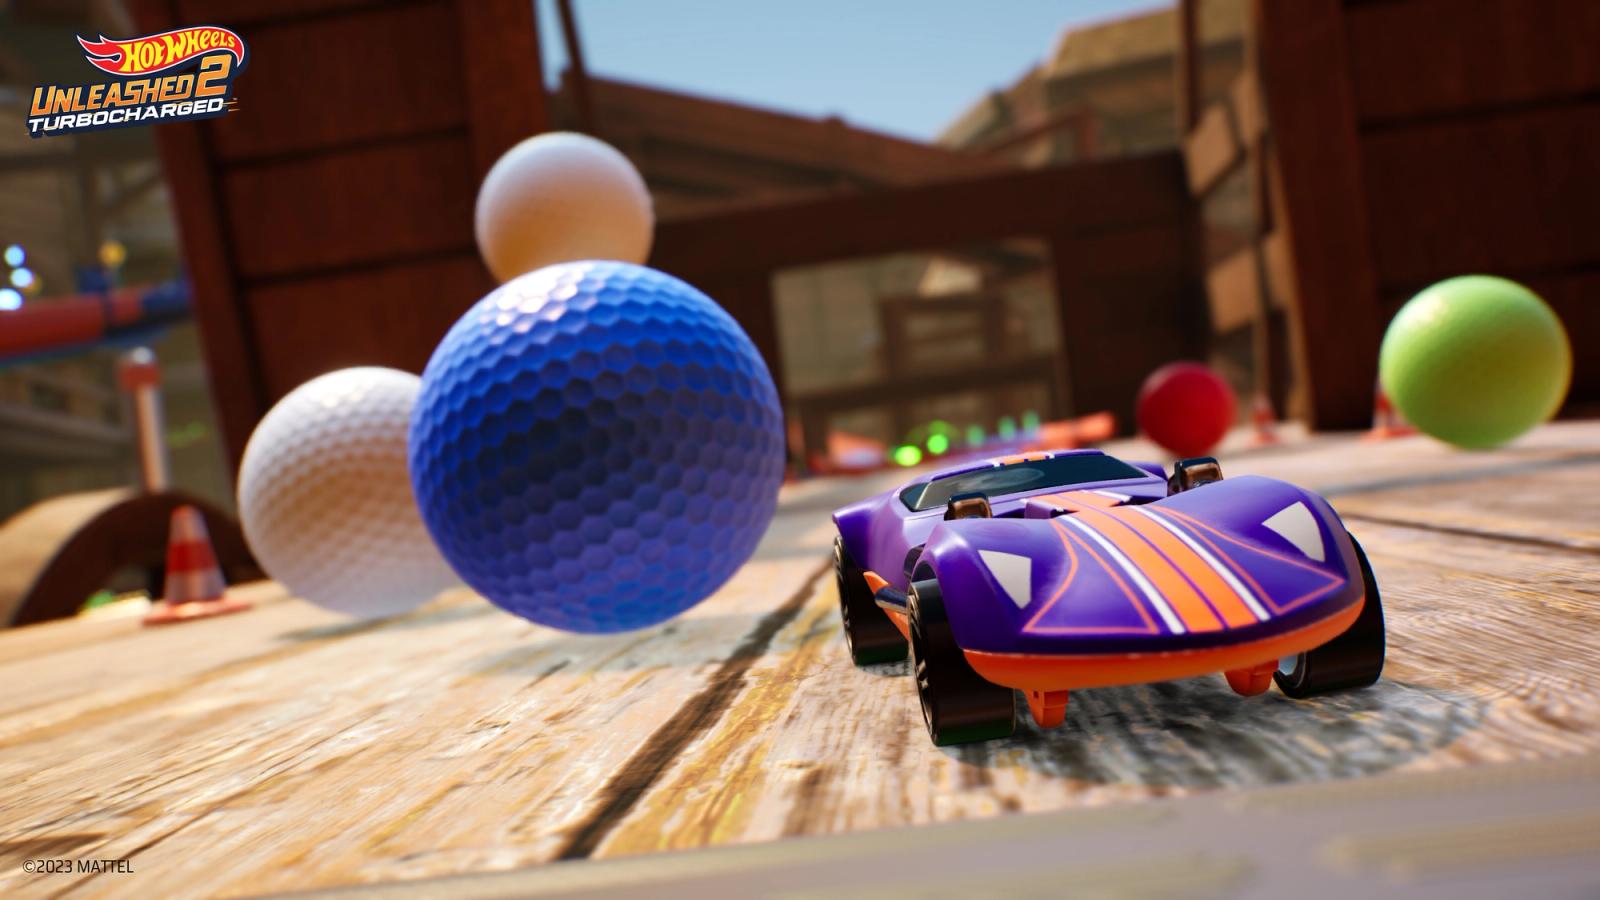 How to Boost Start in Hot Wheels Unleashed 2 - Turbocharged